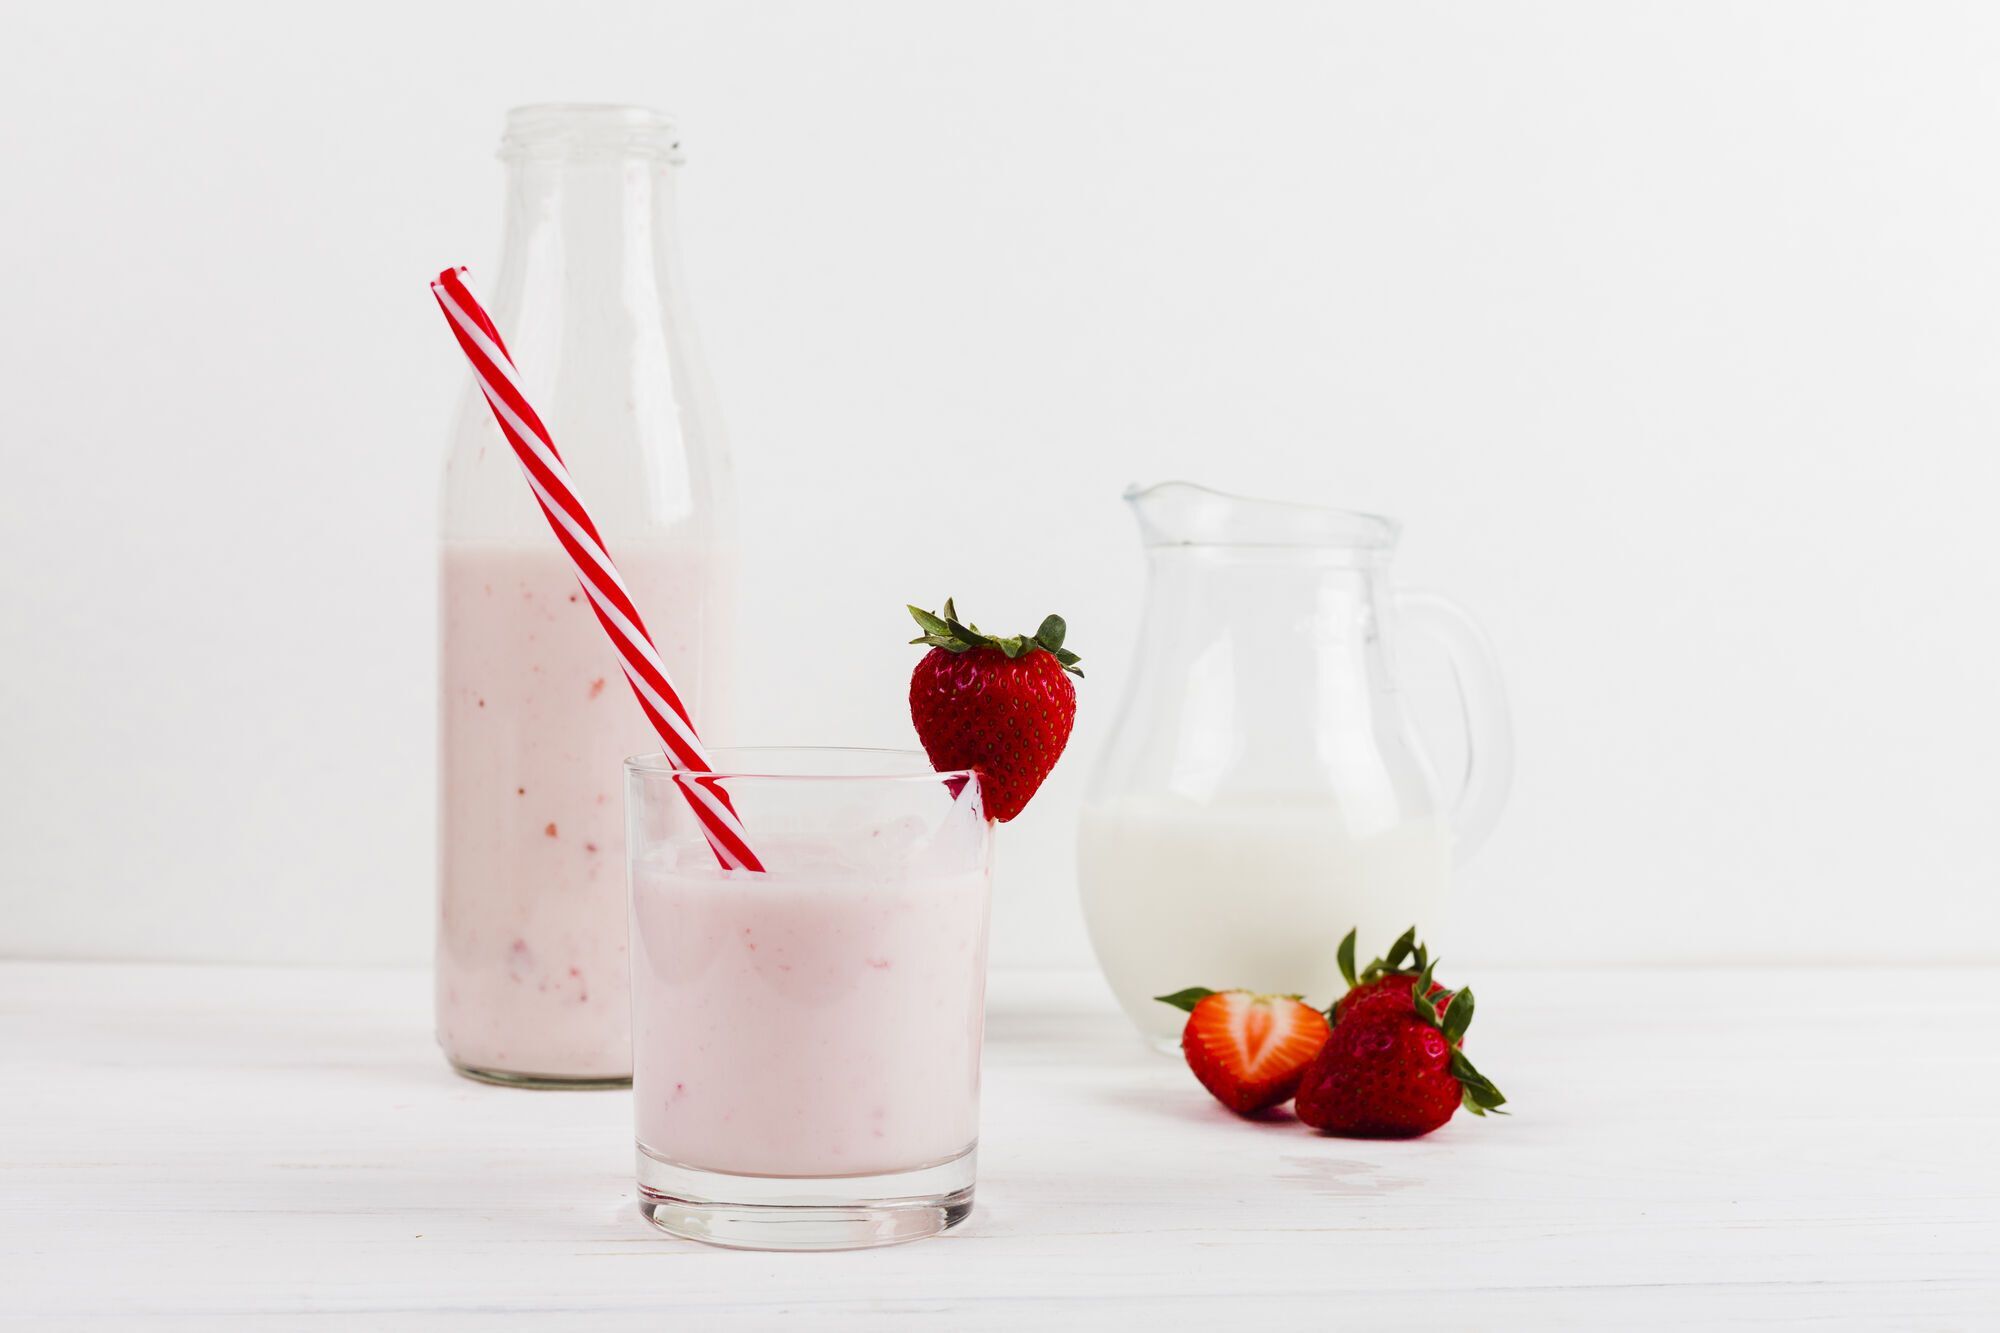 Almond and strawberry milk: a healthy and tasty summer drink